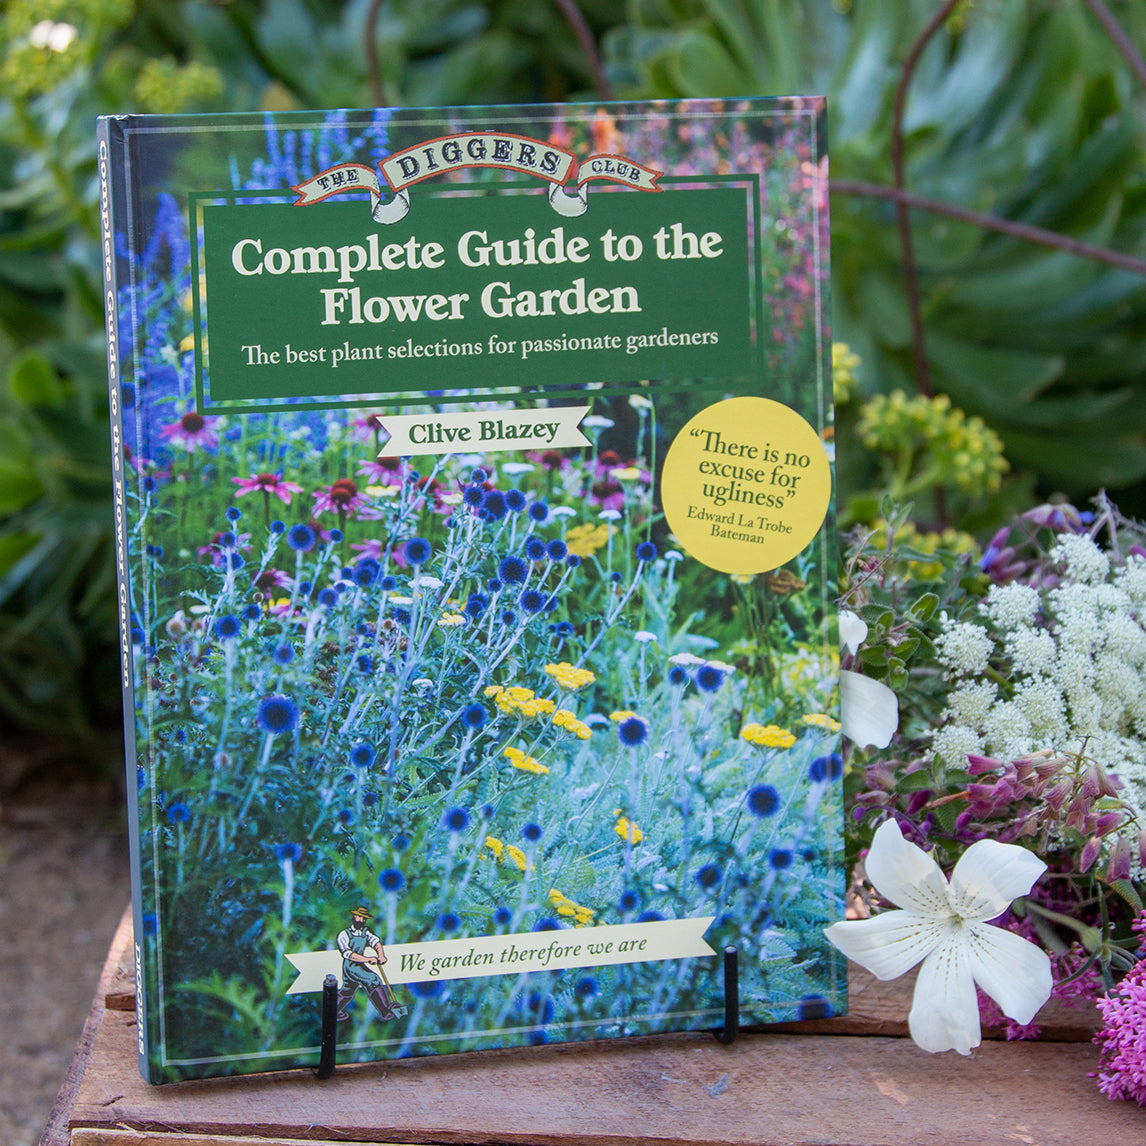 Complete Guide to the Flower Garden